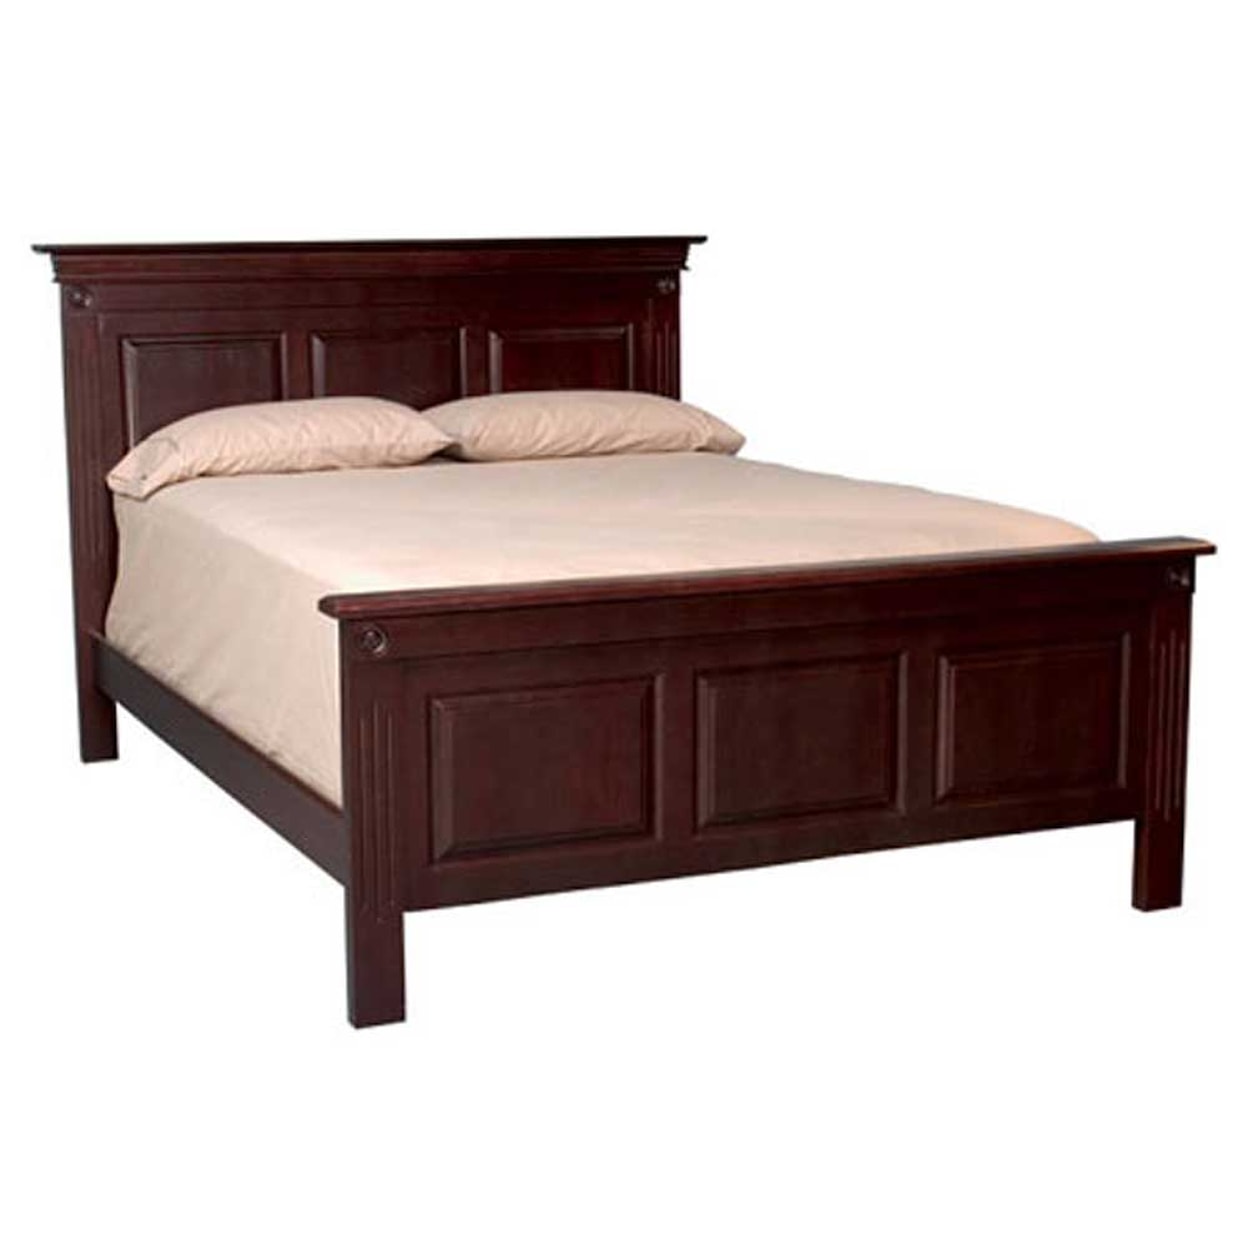 Simply Amish Imperial Amish King 3-Panel Bed